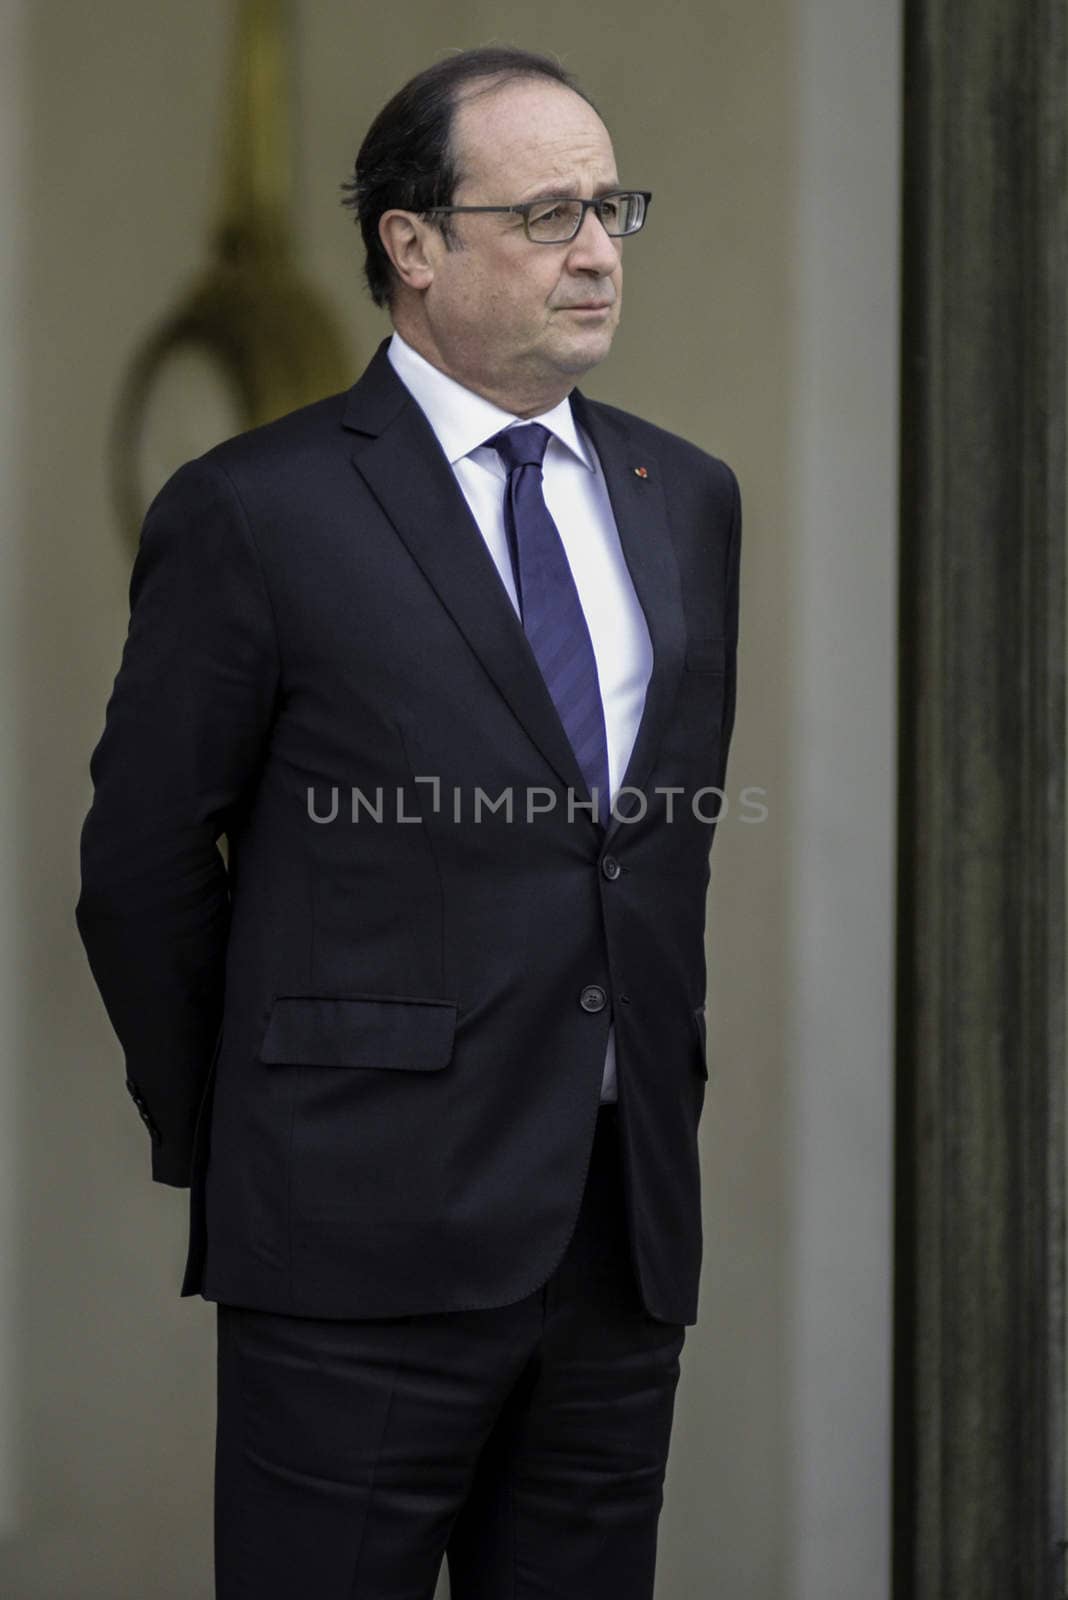 FRANCE, Paris: French President Francois Hollande waits for the arrival of US Secretary of State for their talks at the Elysee palace in Paris on November 17, 2015, four days after a spate of coordinated attacks in Paris that left at least 129 dead and over 350 injured late on November 13. US Secretary of State John Kerry arrived in Paris for talks after the attacks on the French capital, vowing to defeat terrorism.